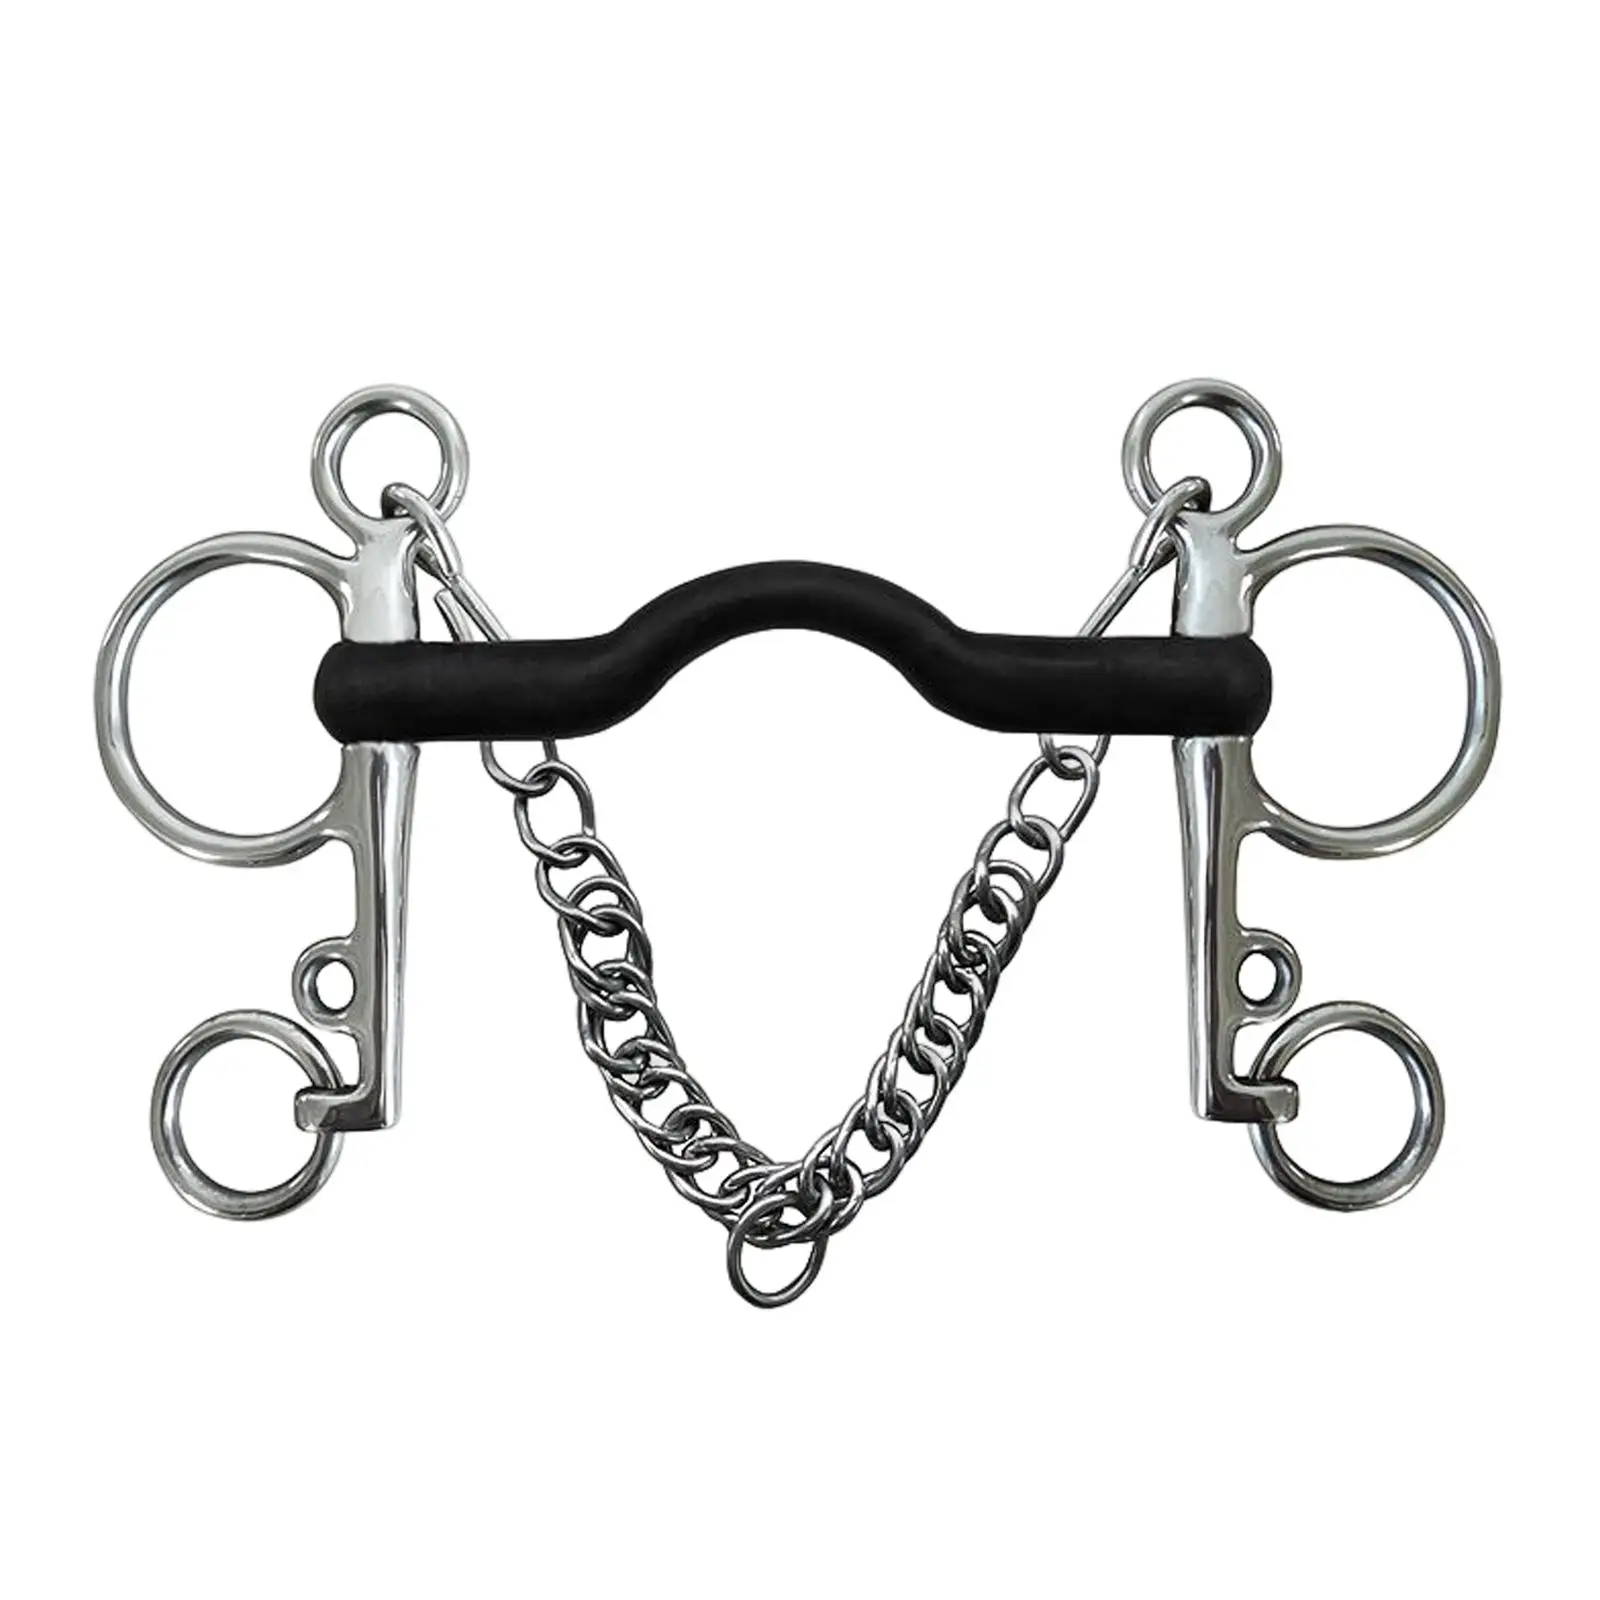 Horse Bit, Stainless Steel, with Curb Hook Chain, with Silver Trim, Cheek Mouth